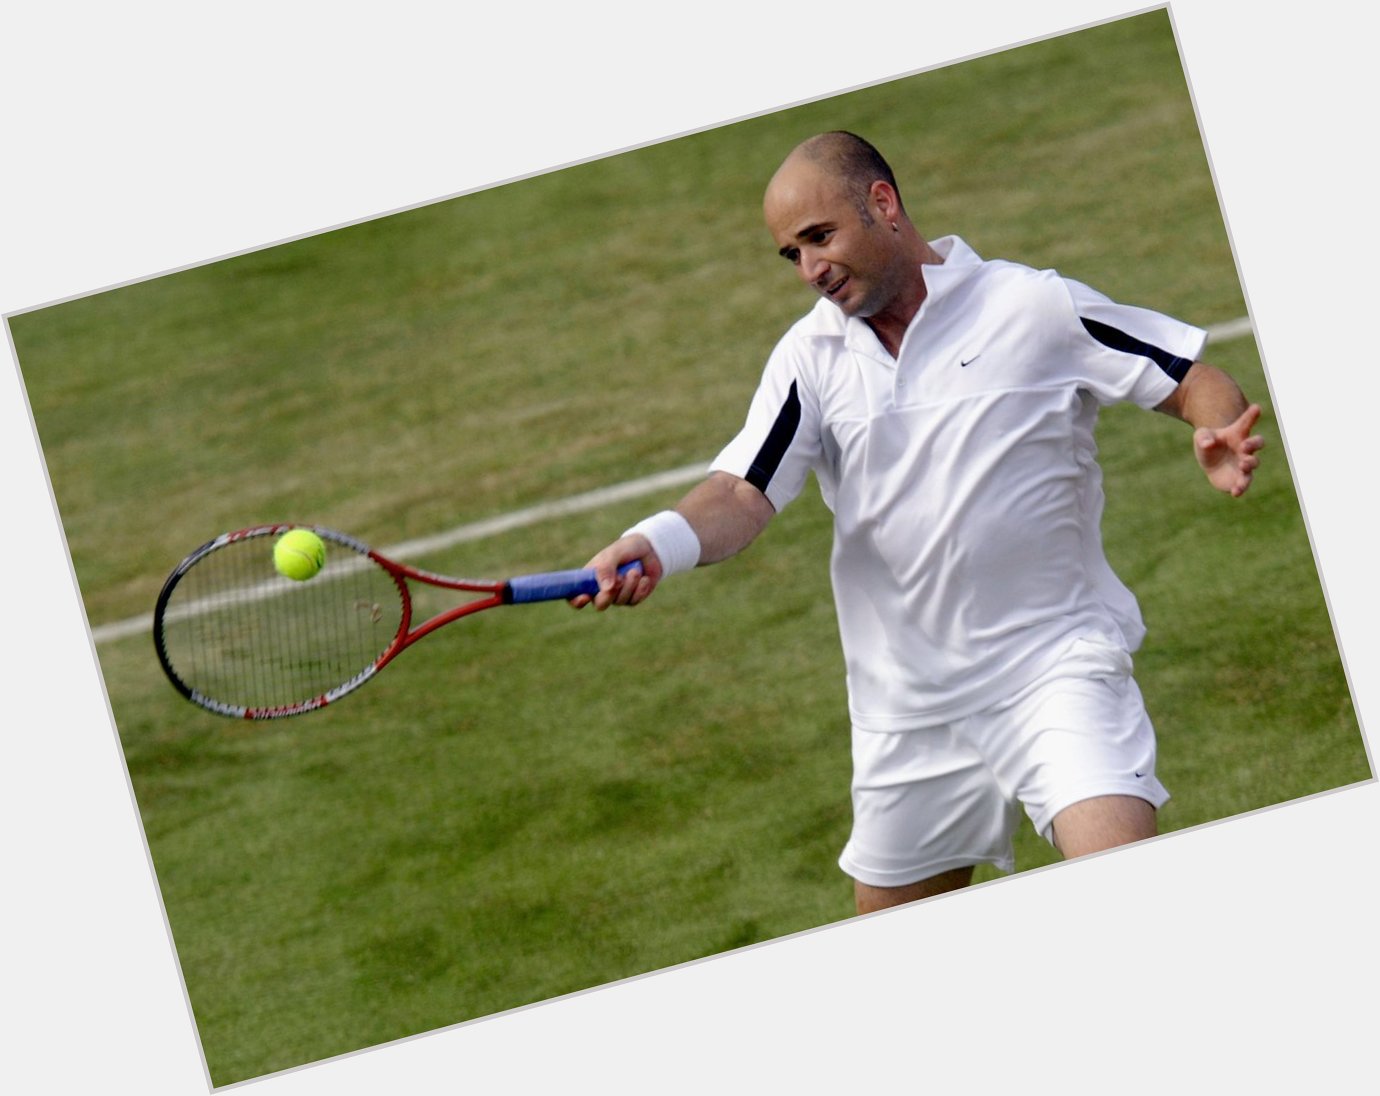 Happy 50th birthday, Andre Agassi! 

It was a pleasure to watch you on our courts. 